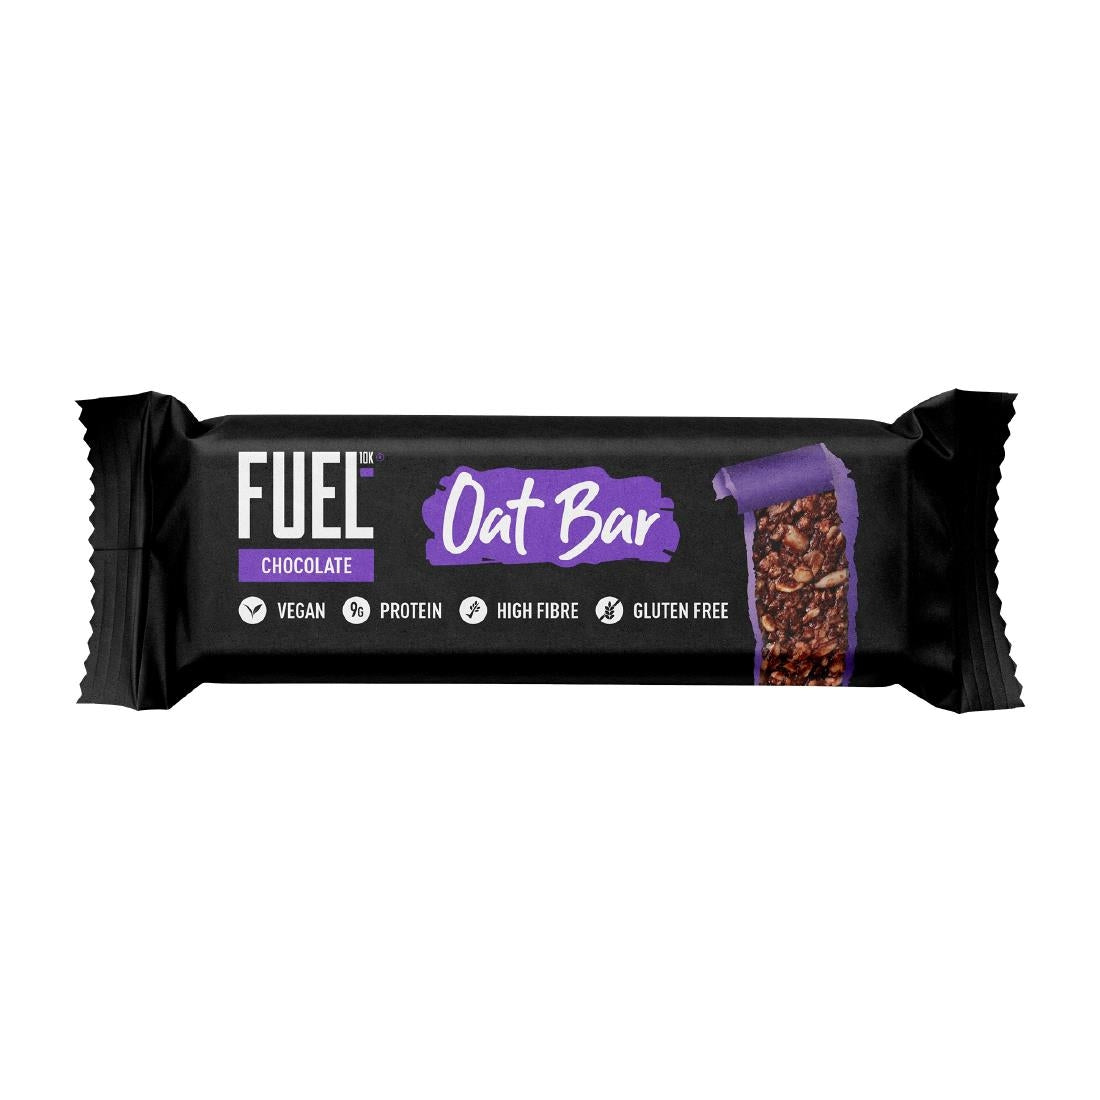 HS850 FUEL10K Chocolate Oat Bars 45g (Pack of 16)